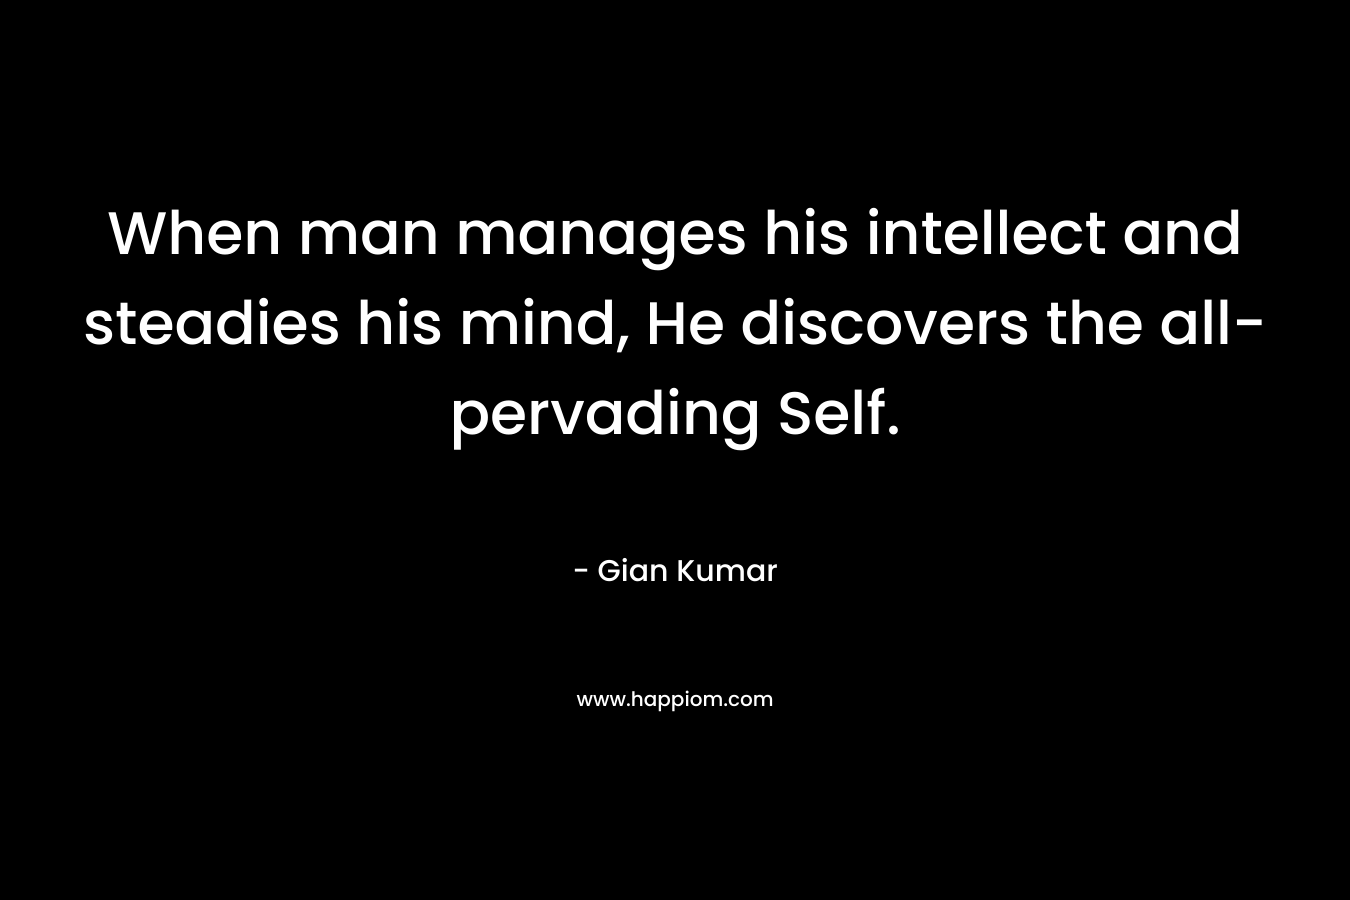 When man manages his intellect and steadies his mind, He discovers the all-pervading Self. – Gian Kumar